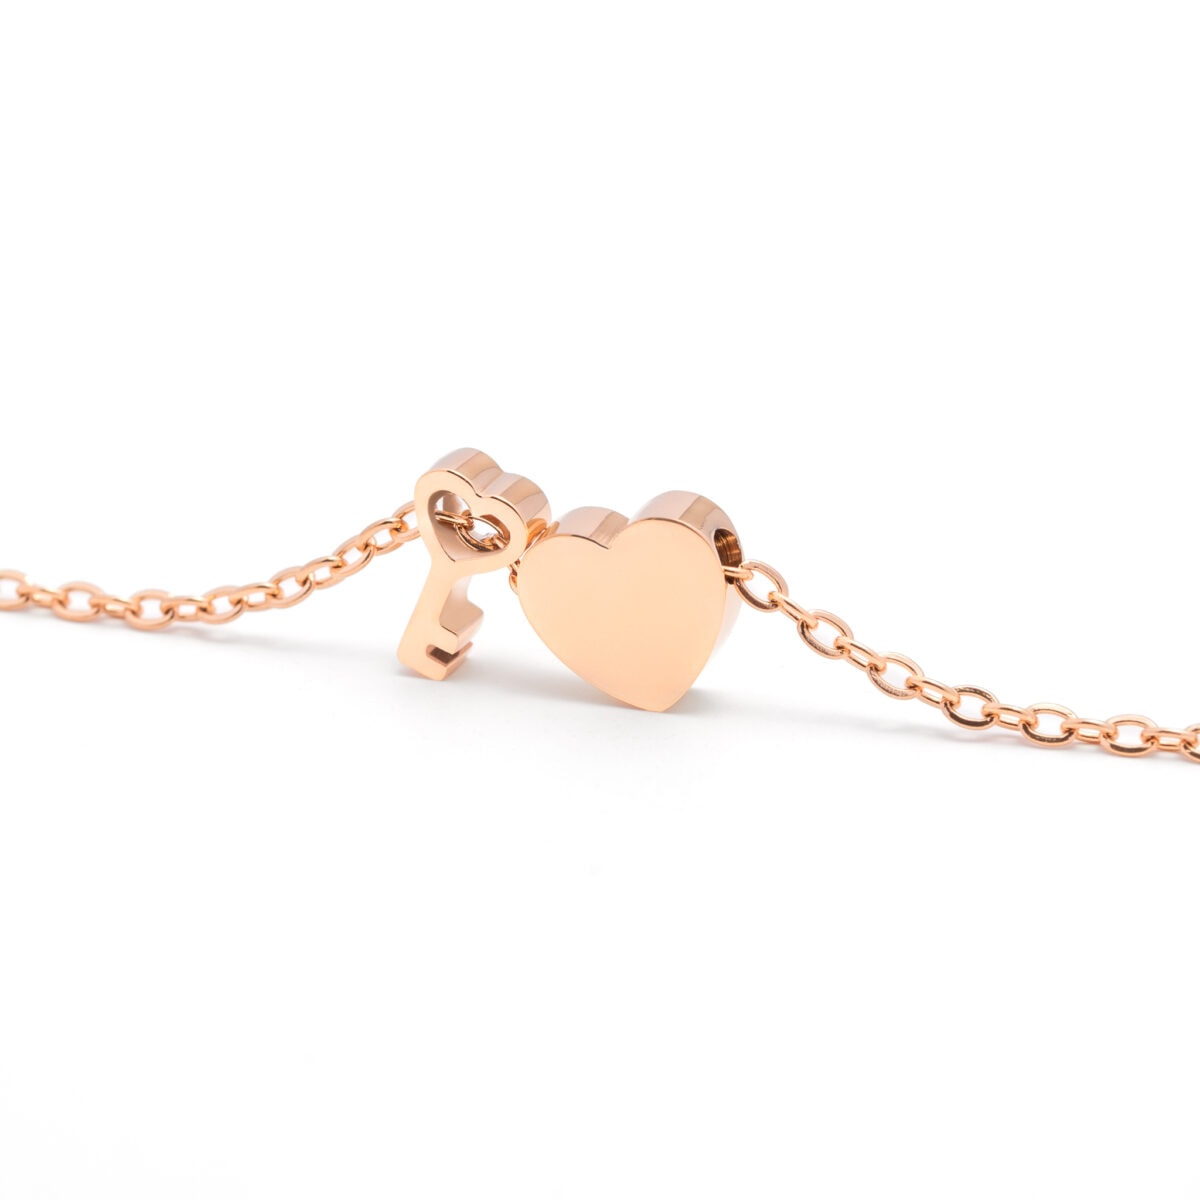 https://m.clubbella.co/product/key-to-thee-heart-rose-gold-charm-bracelet/ Key to Thee Rose Gold (1)